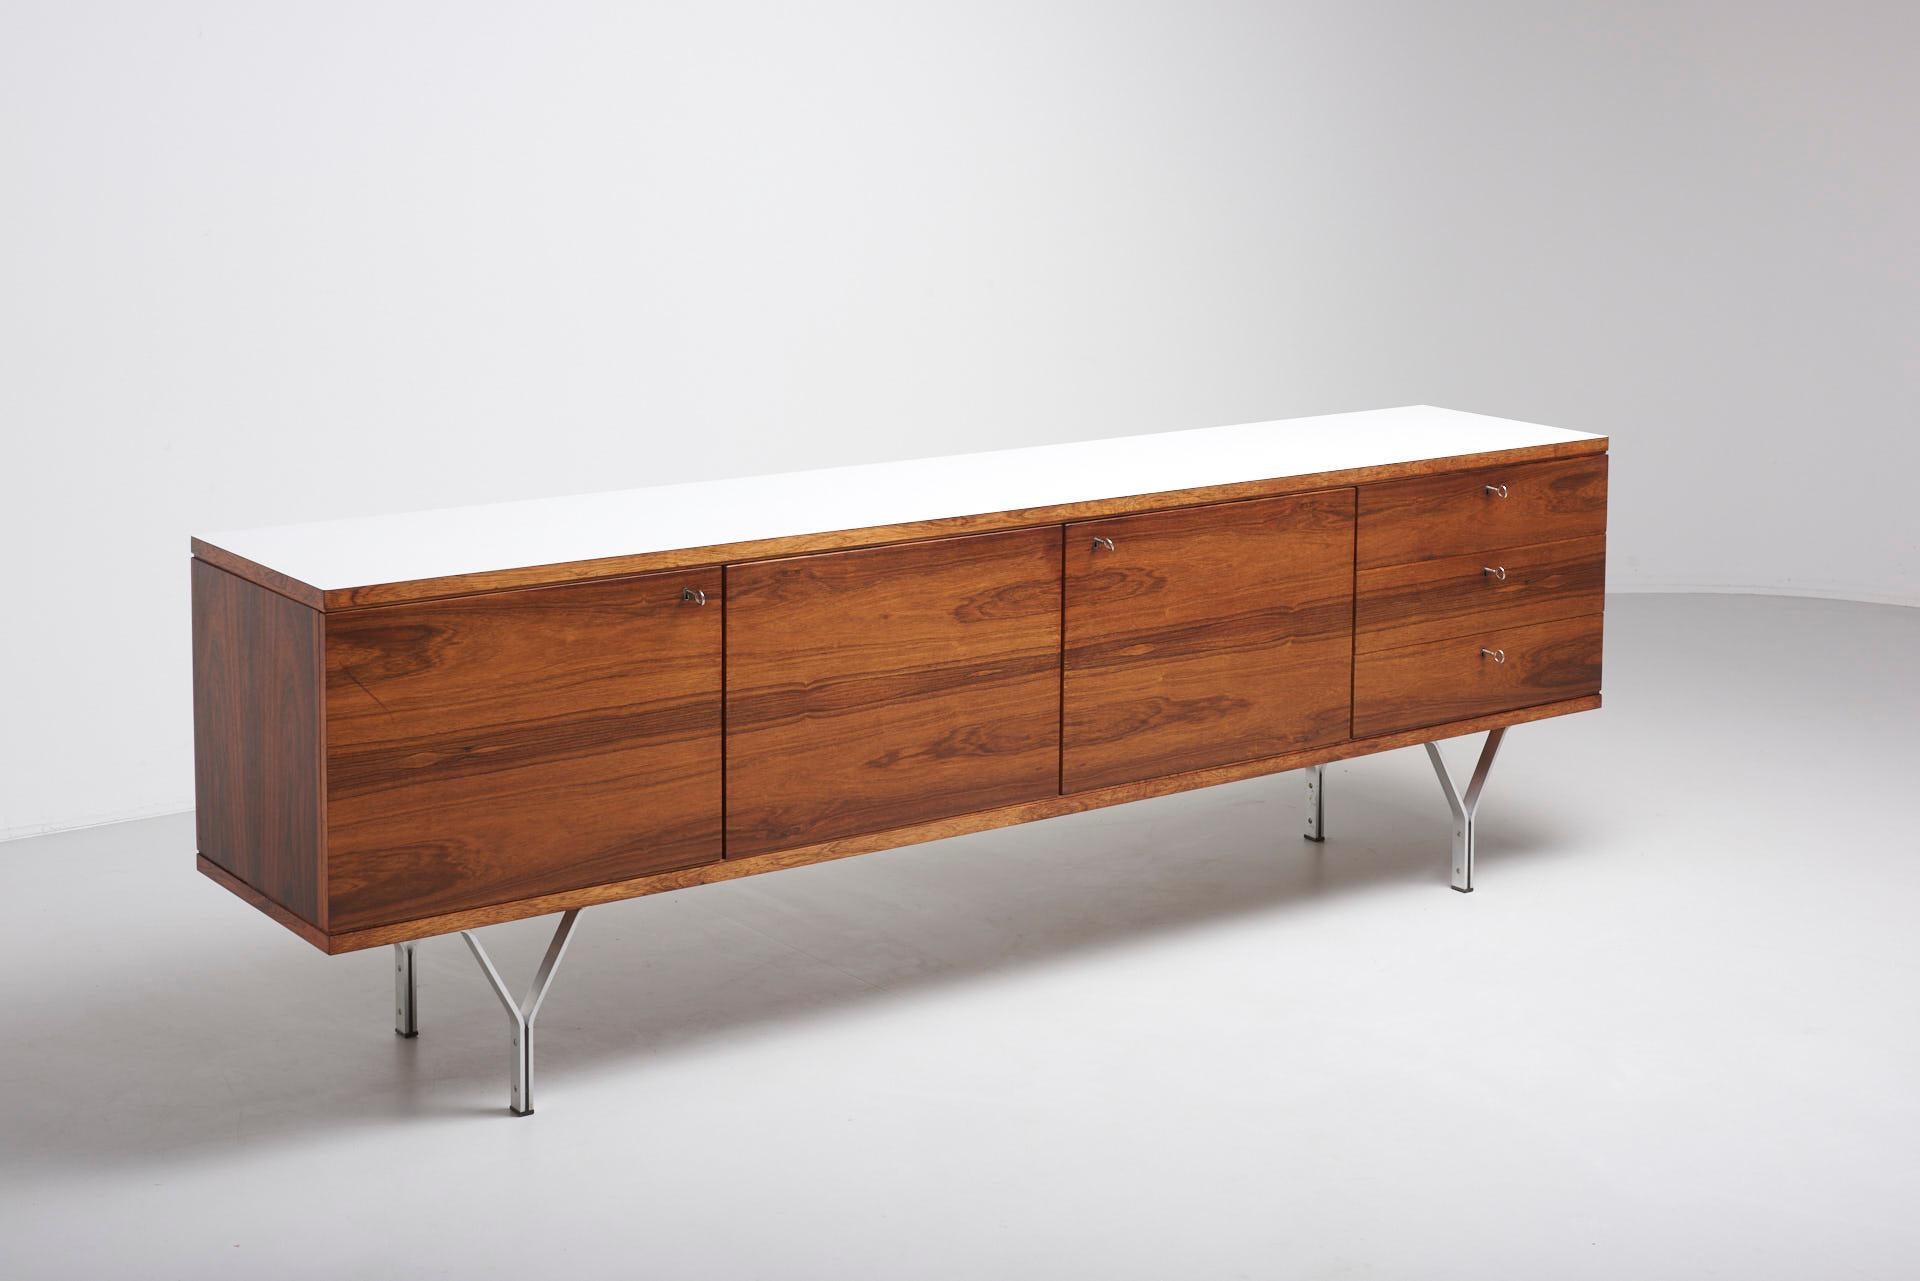 Minimal sideboard in Rio Palissander with legs in stainless steel and top in white laminate.
Made in Germany in 1960s.